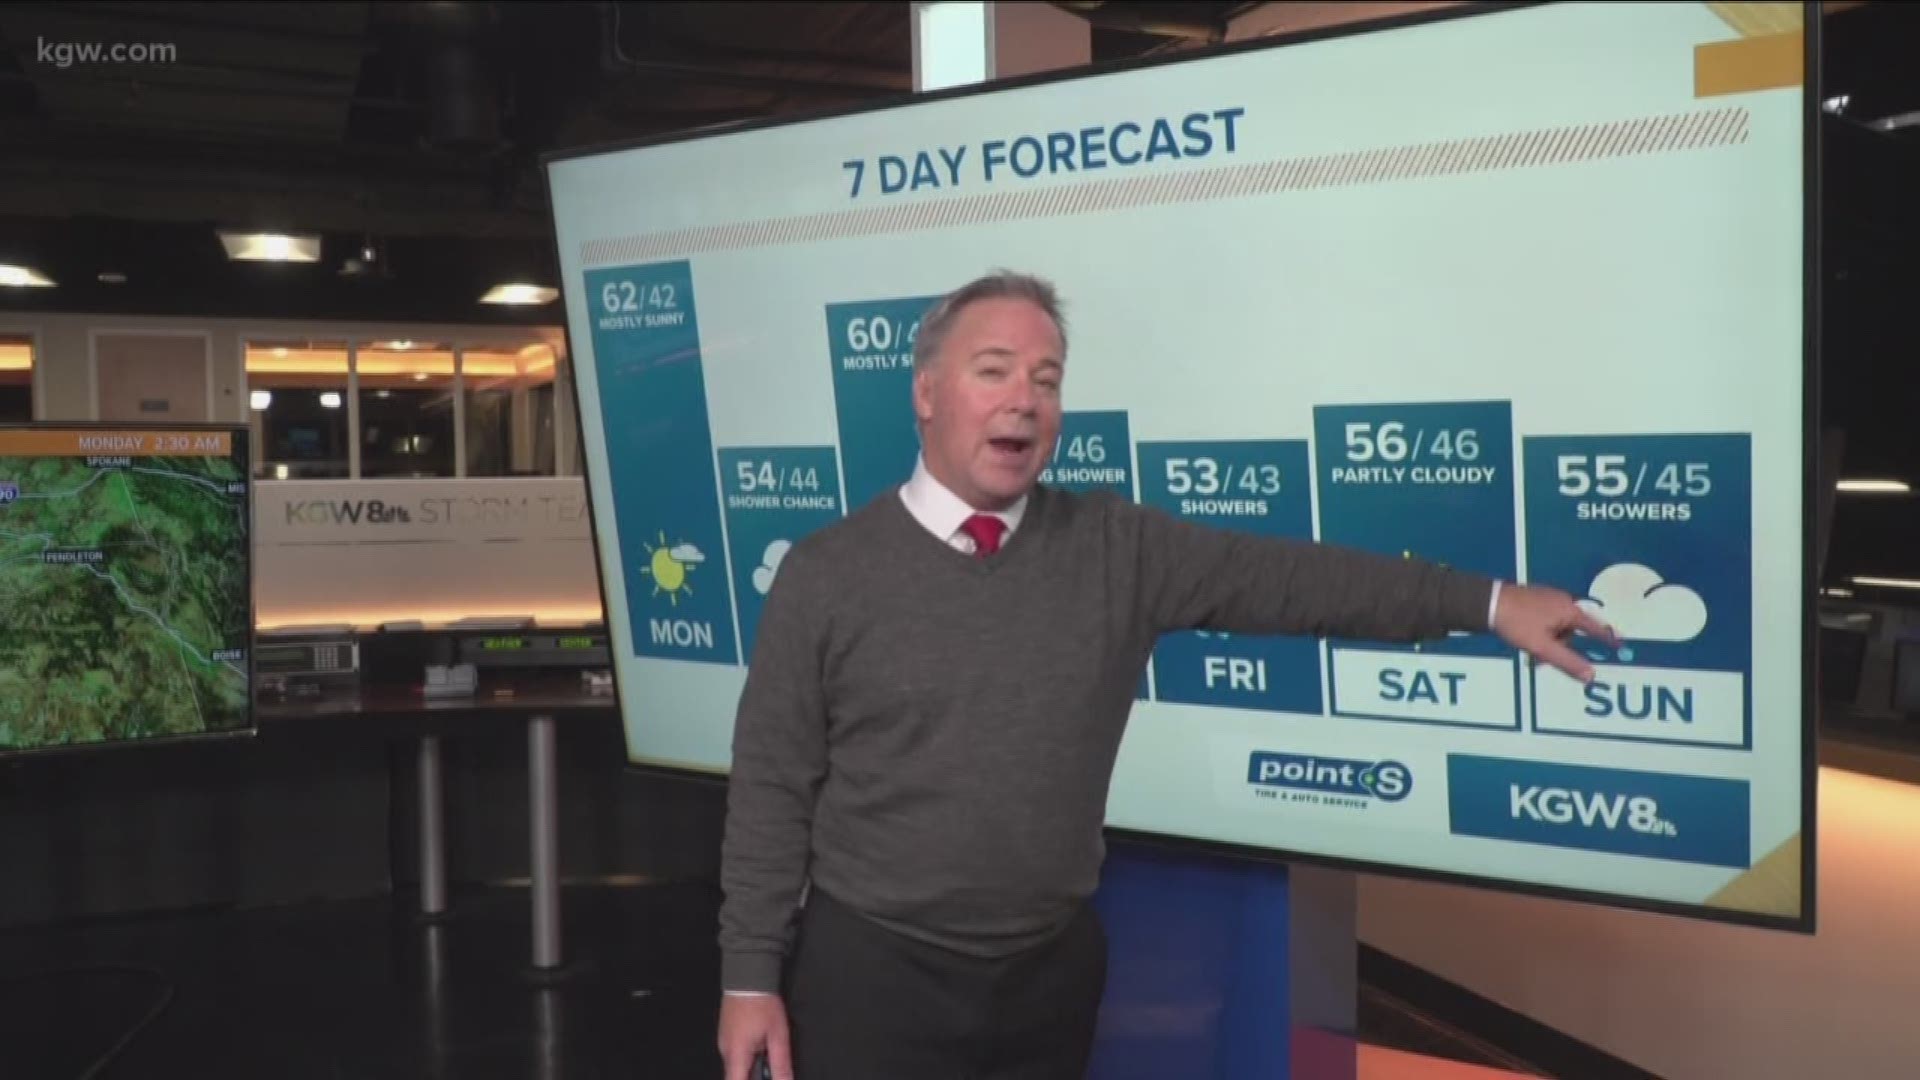 KGW's Rod Hill said after a relatively dry week, Portland could be looking at 6 weeks of rain.